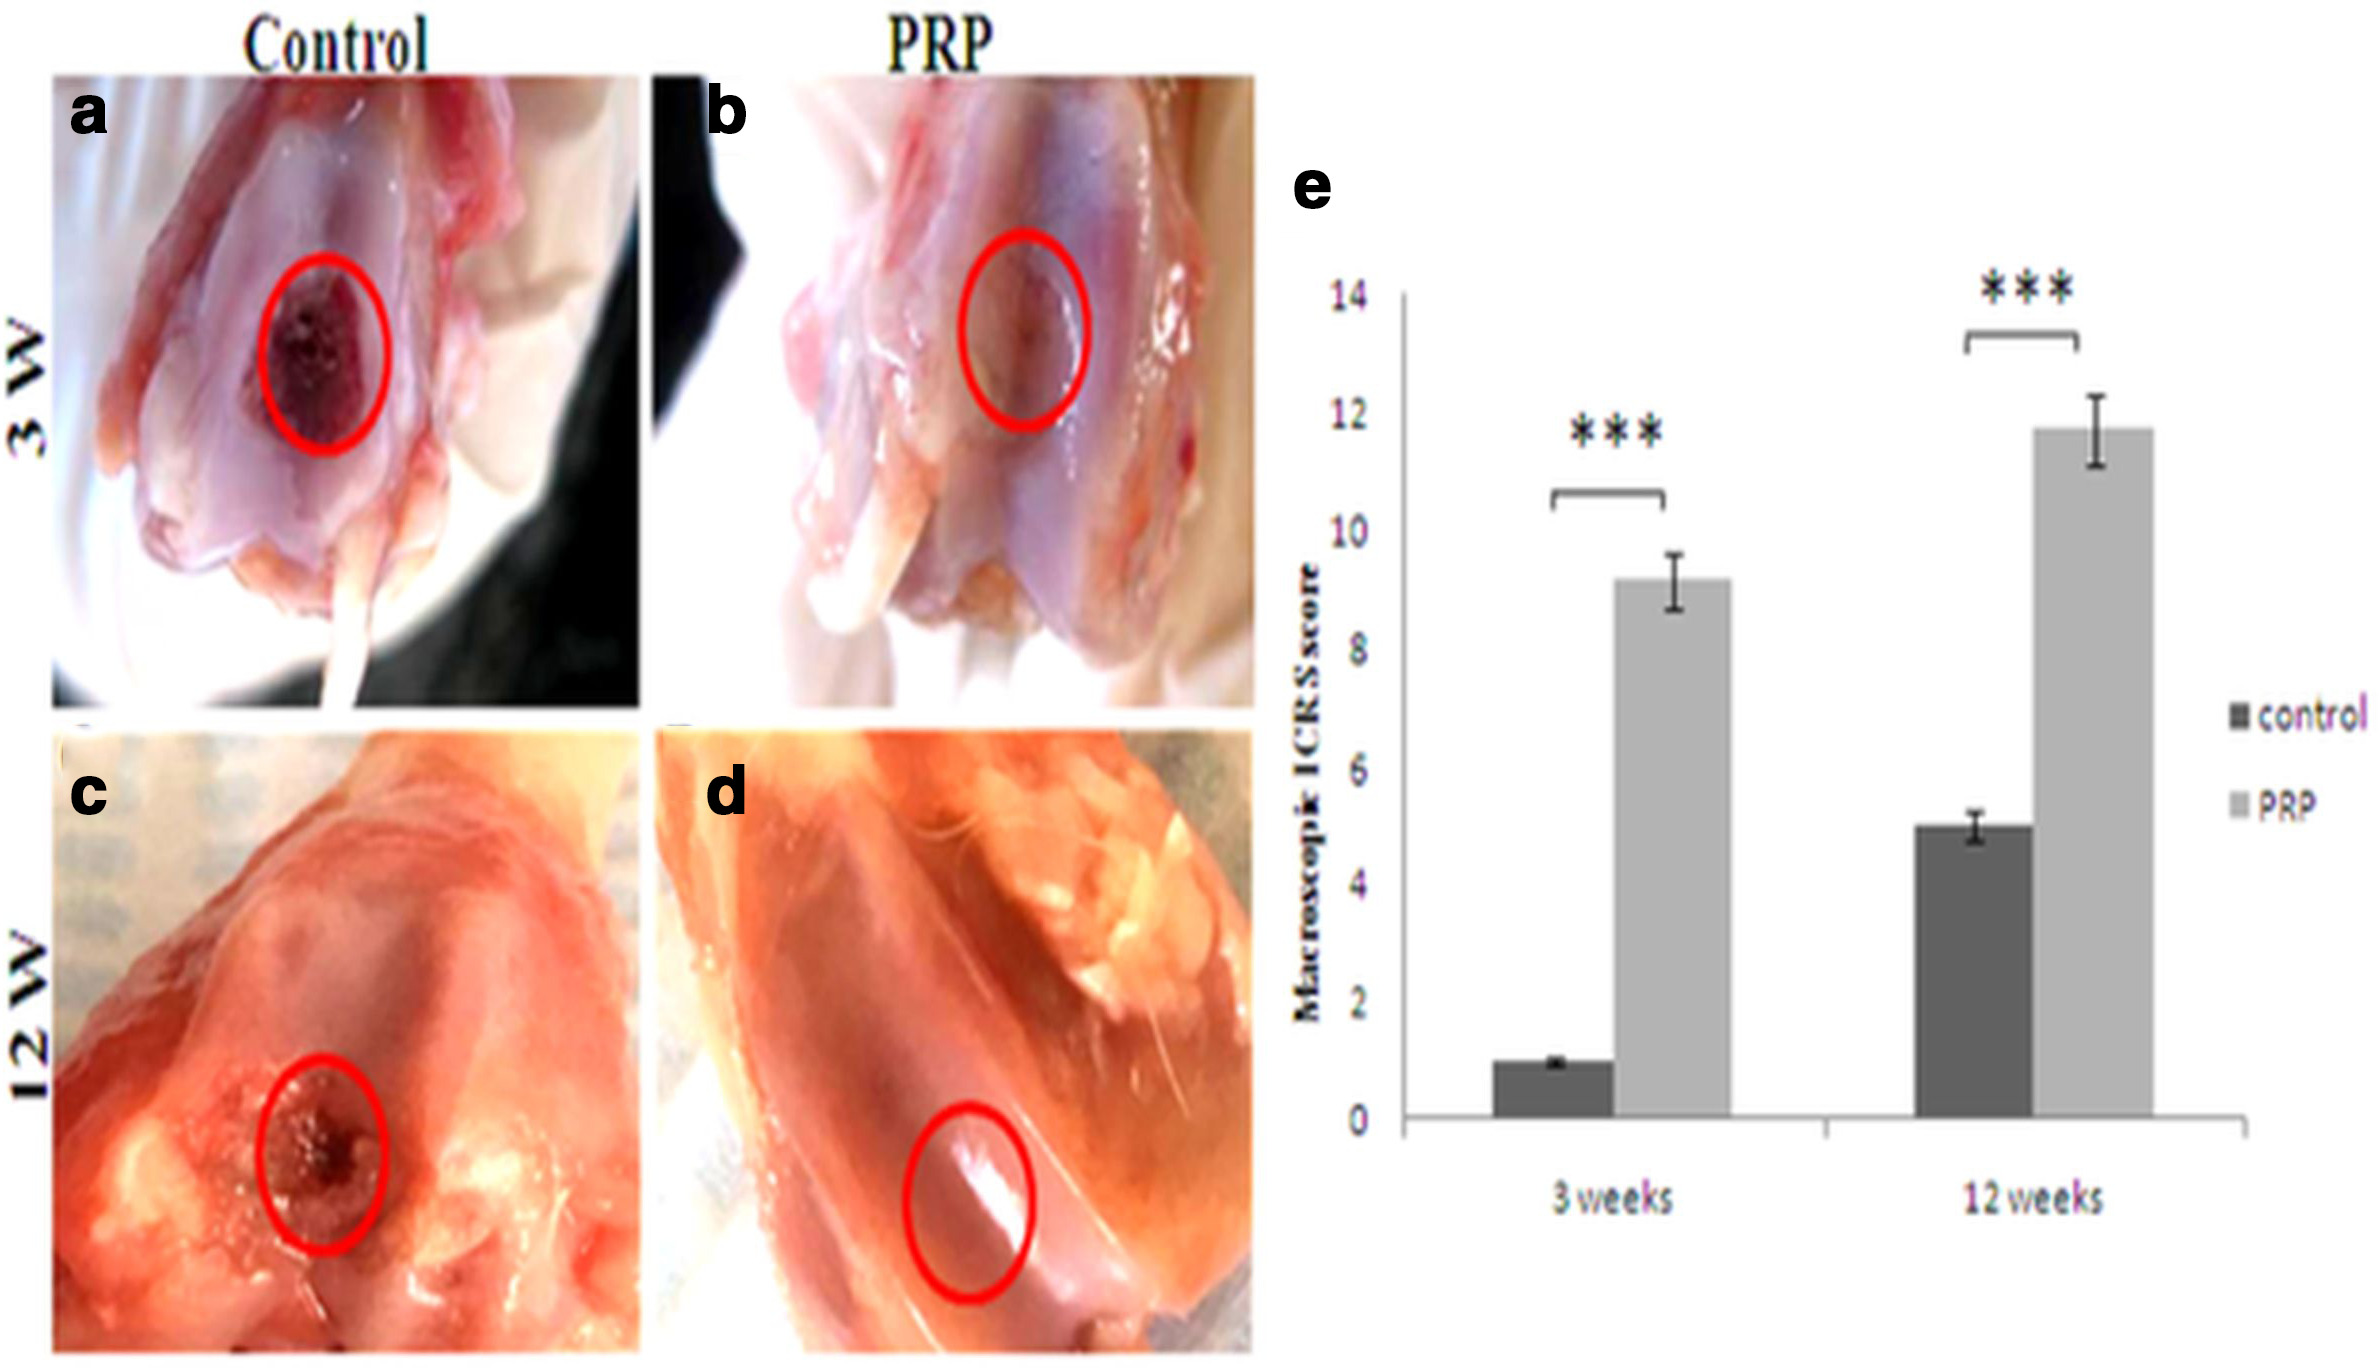 Fig. 2 
            Representative photographs of gross appearance of defect in trochlear groove (4 mm in diameter) at: a) and b) week 3; c) and d) week 12. a) and c) controls; b) complete restoration of the articular surface of the defect; d) similar appearance to the normal cartilage. The red circles indicate the original defect margin. e) Macroscopic assessment of cartilage repair was assessed by International Cartilage Repair Society (ICRS) macroscopic evaluation scale. Results are presented as the mean and standard deviation (SD); statistical analysis was performed to compare scores of treated and control groups. ***p < 0.05, non-parametric Wilcoxon signed-rank test. Control, untreated group; platelet-rich plasma (PRP), group treated with PRP.
          